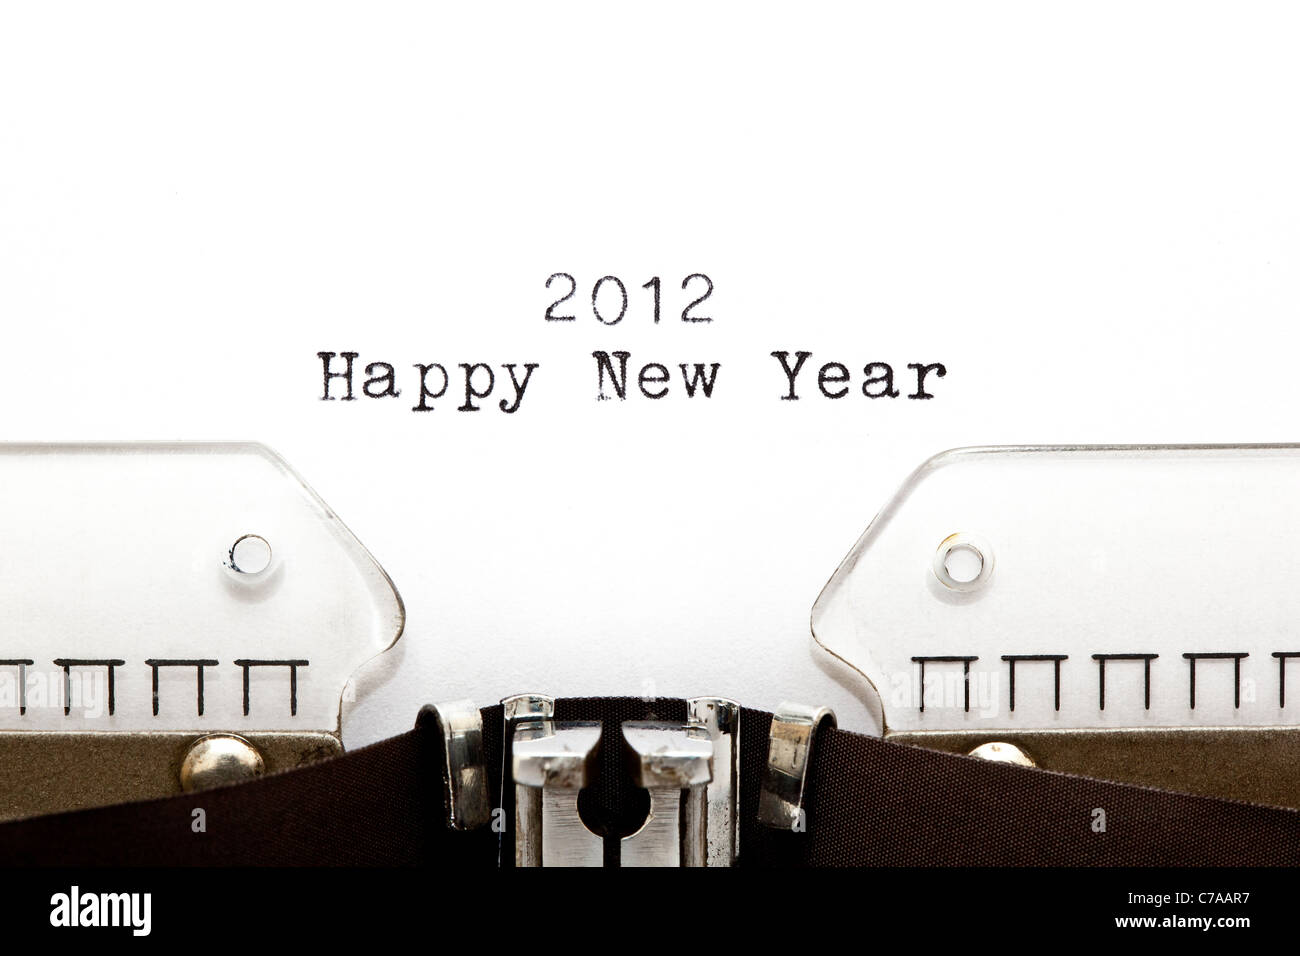 Concept image with 2012 HAPPY NEW YEAR written on an old typewriter Stock Photo